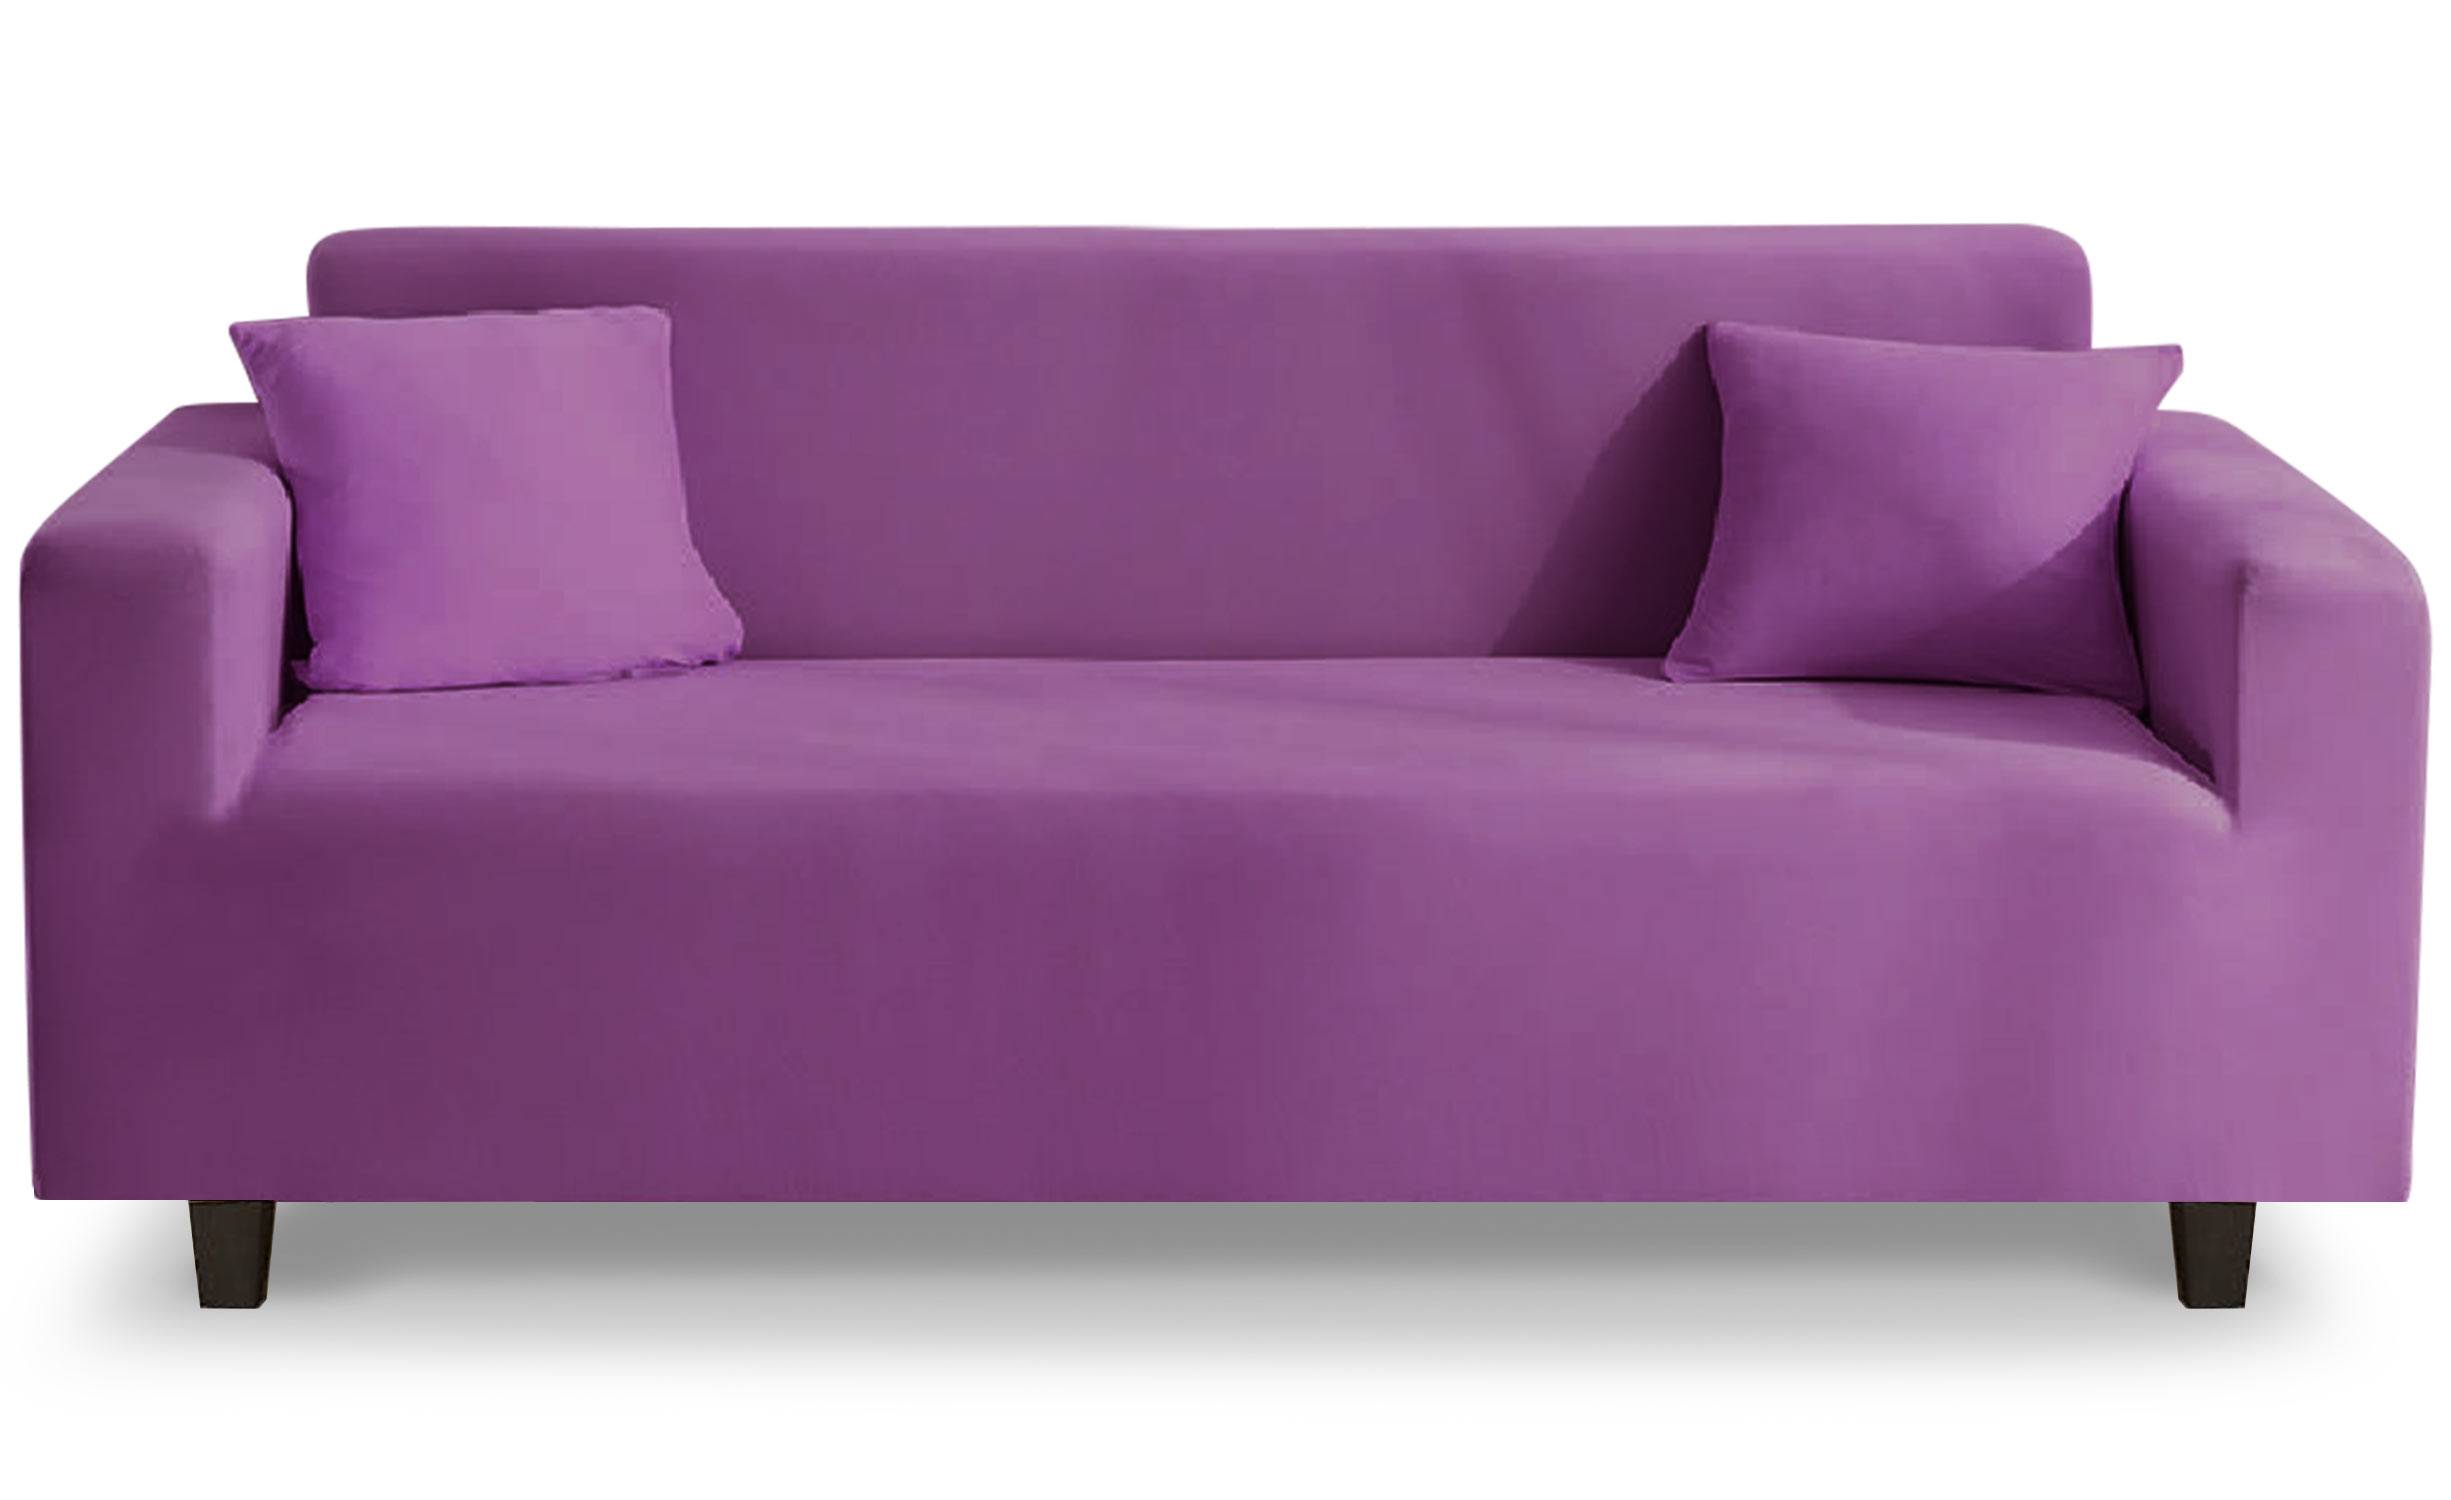 https://cdn.menzzo.com/media/catalog/product/h/o/u/housse-de-fauteuil-extensible-decoprotect-3-places-violet_0-633aa66215f14.jpg?twic=v1/resize=700